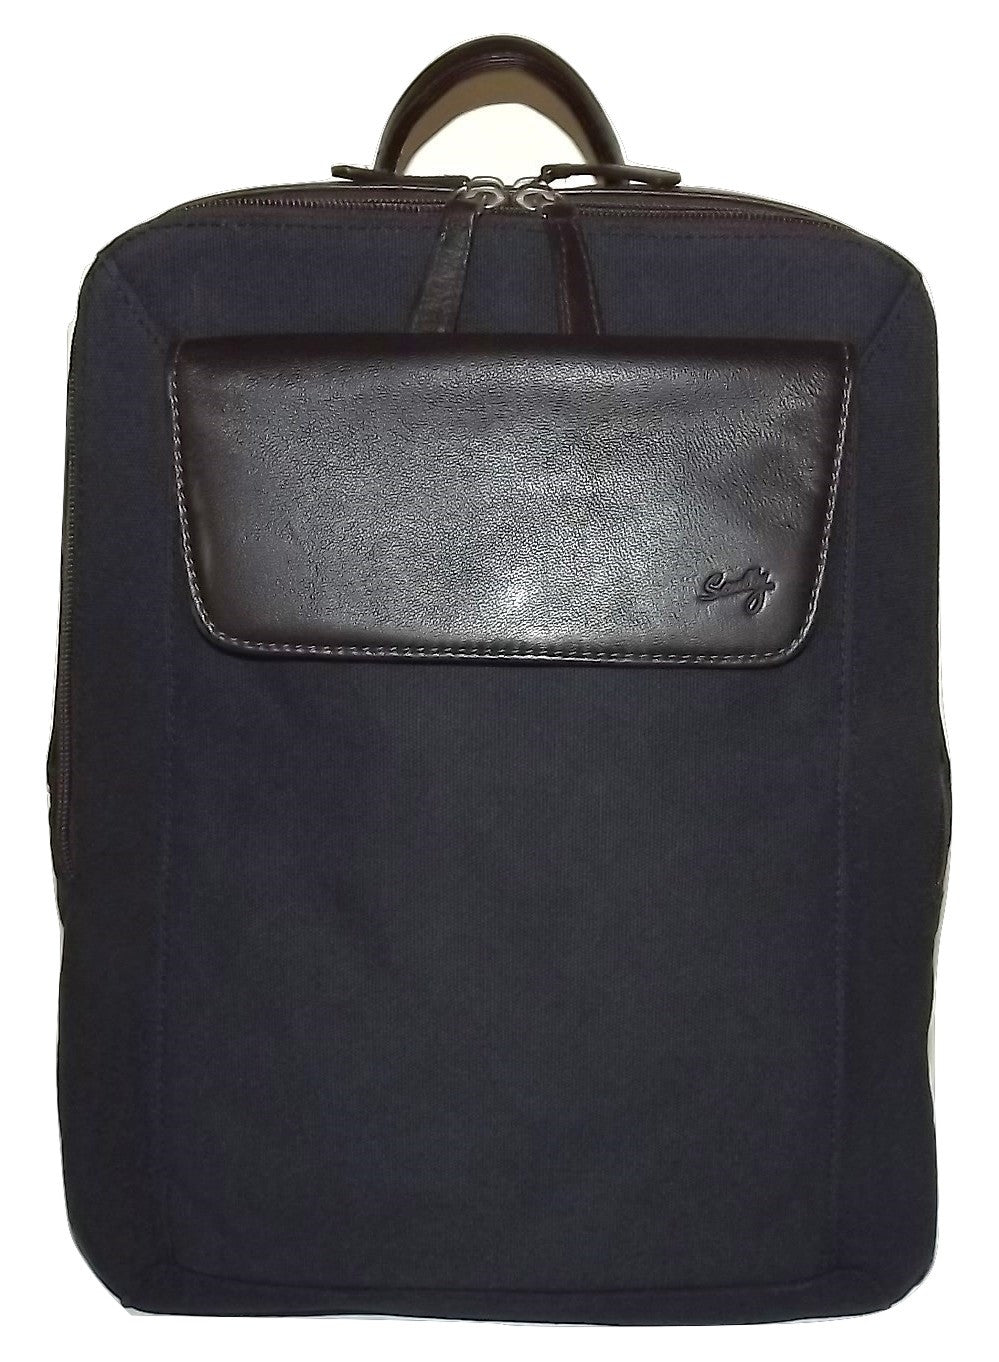 Scully Flint Dual Compartment Canvas & Leather Laptop Business Backpack Navy